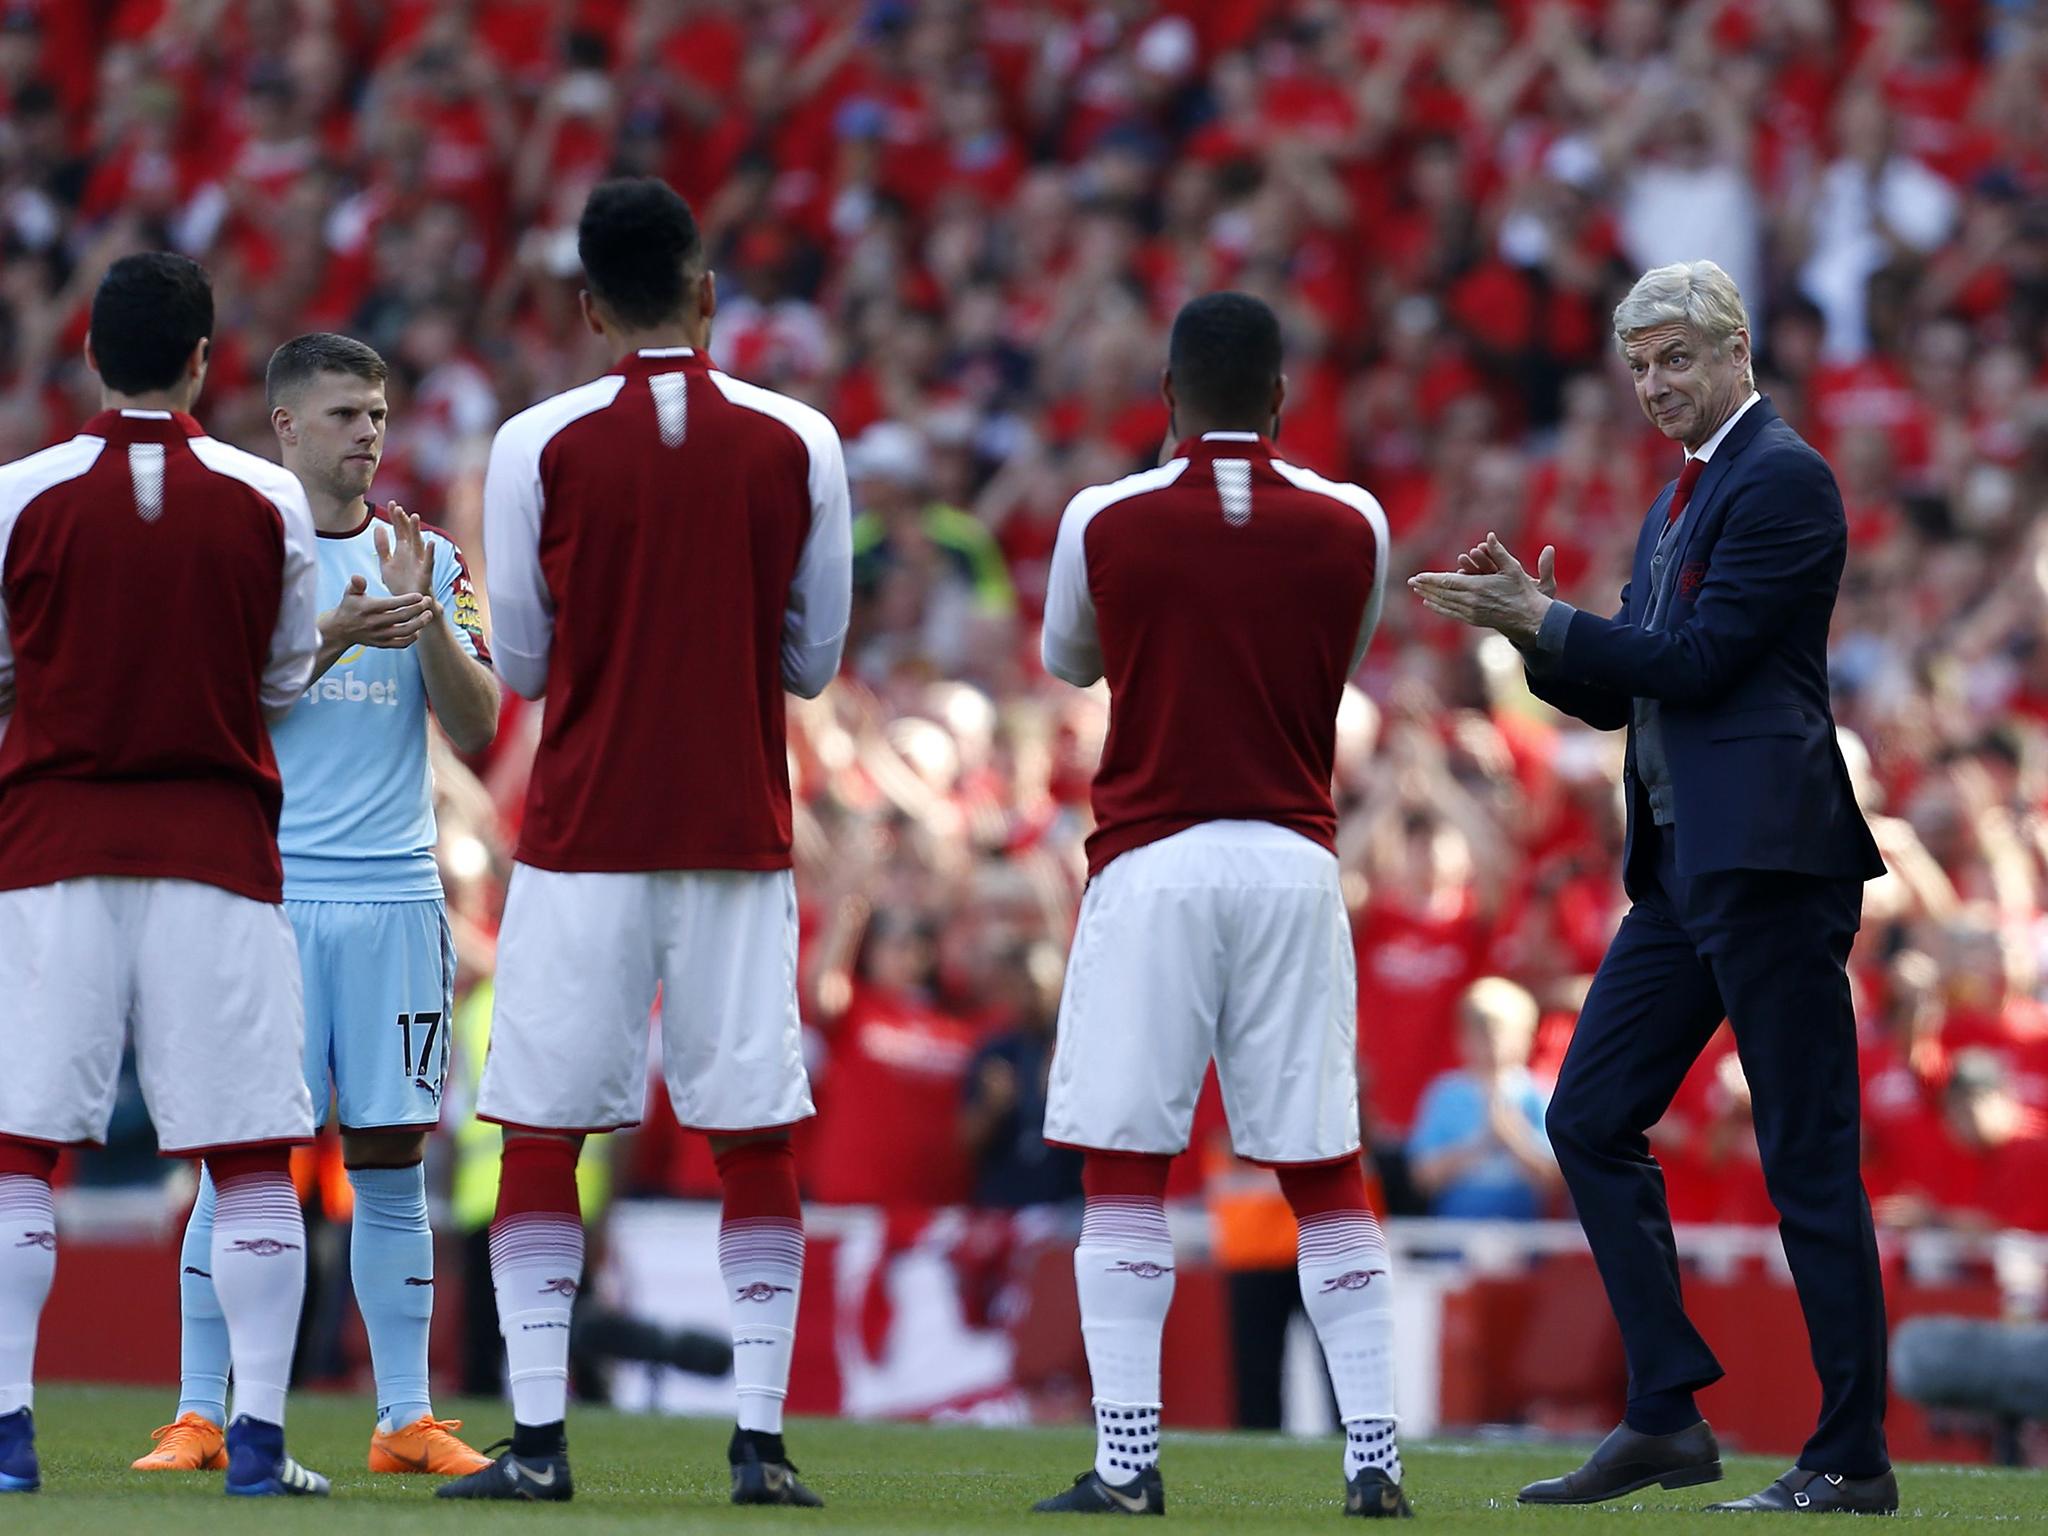 Arsene Wenger believes the current Arsenal squad does not get the credit it deserves